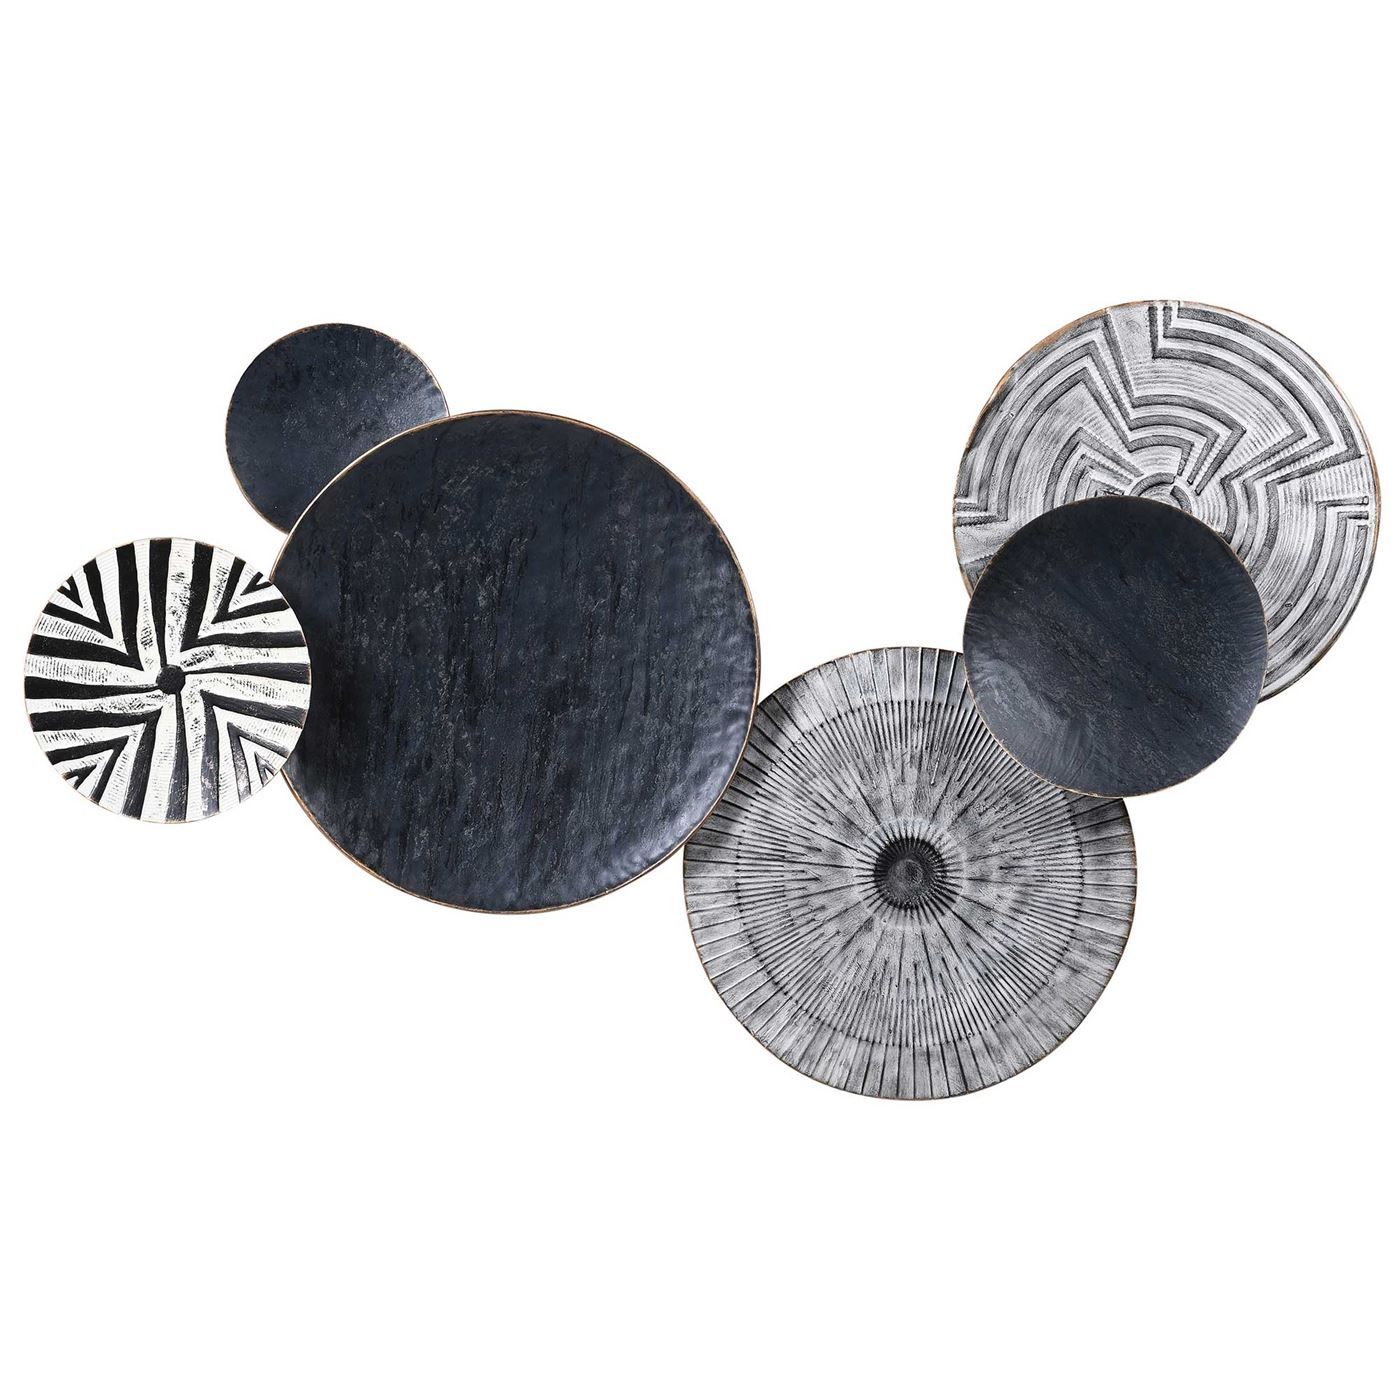 Decorative Circular Tribal Print Wall Art Black And White – Barker &  Stonehouse In 2018 Tribal Pattern Wall Art (View 15 of 20)